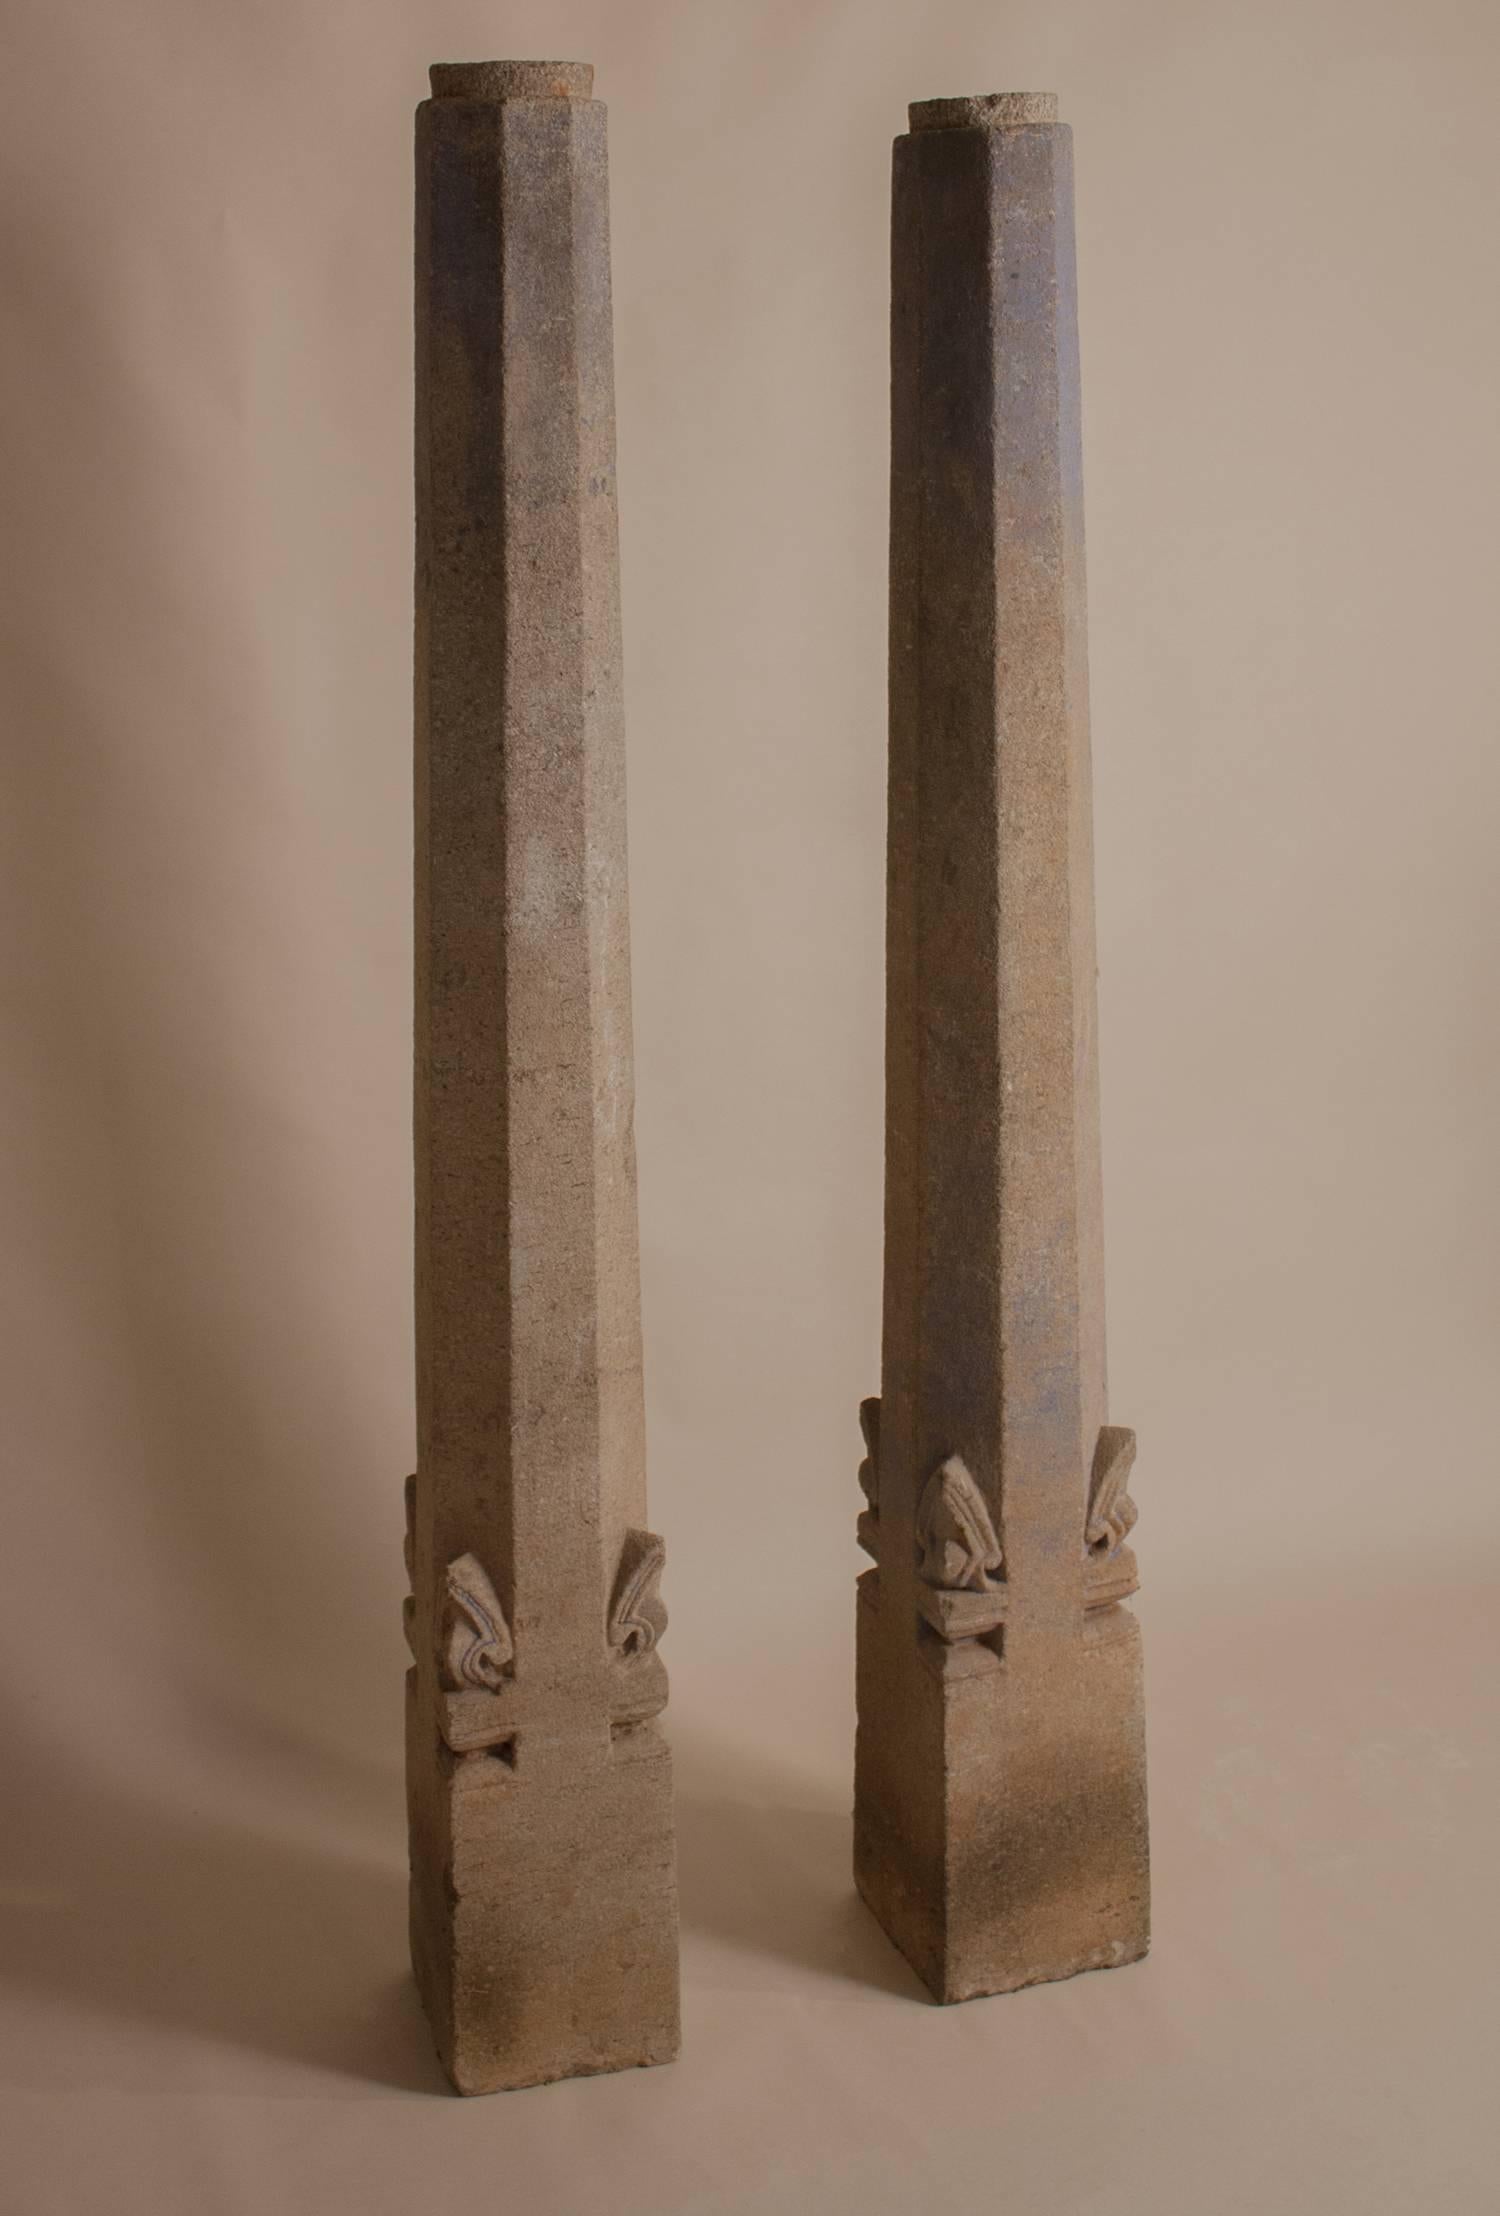 These granite octagonal pillars are from the Blue City on the edge of the Thar Desert in Jodphur, India. Simple and organic, the stone columns have retained traces of their original indigo blue paint. At 5 feet 4 inches tall, interior and landscape